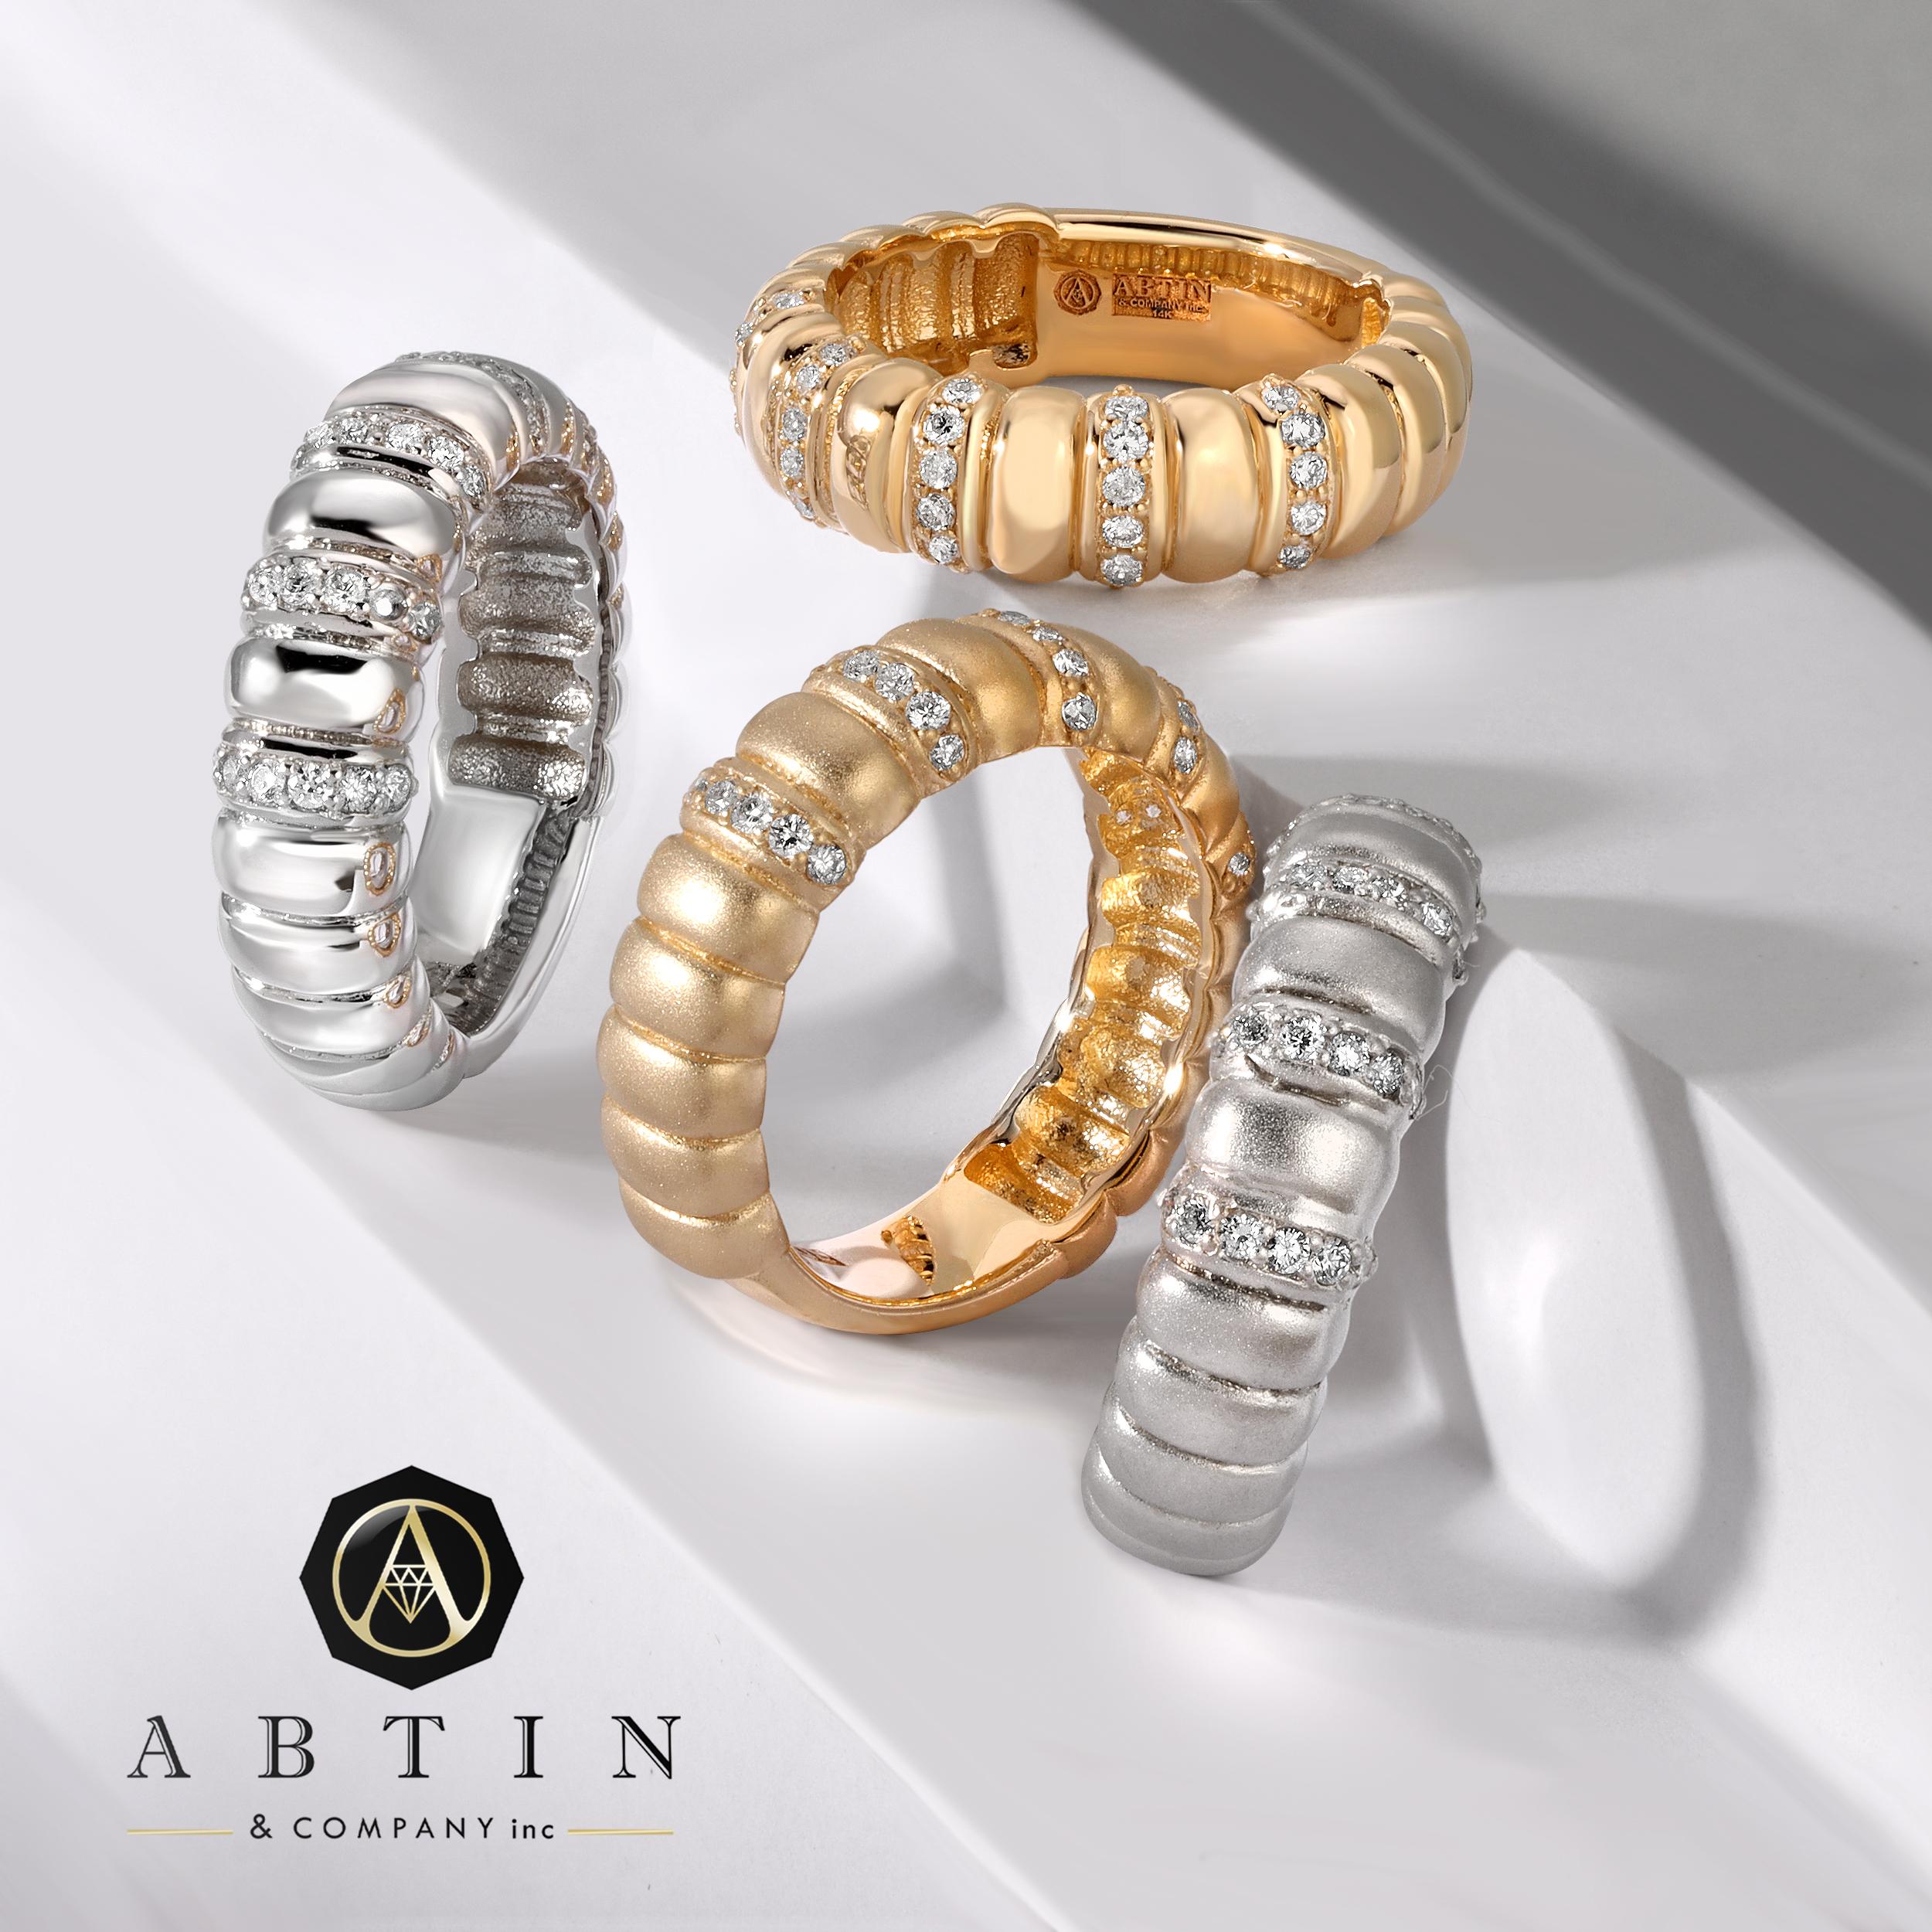 Crafted in 14K gold, this charming ring  showcases 0.28 ct of diamonds in a classic look. It features a ribbed puff design with alternating diamonds and gold bars. Whether worn solo or in conjunction with other rings, this piece is stunning.
Gold